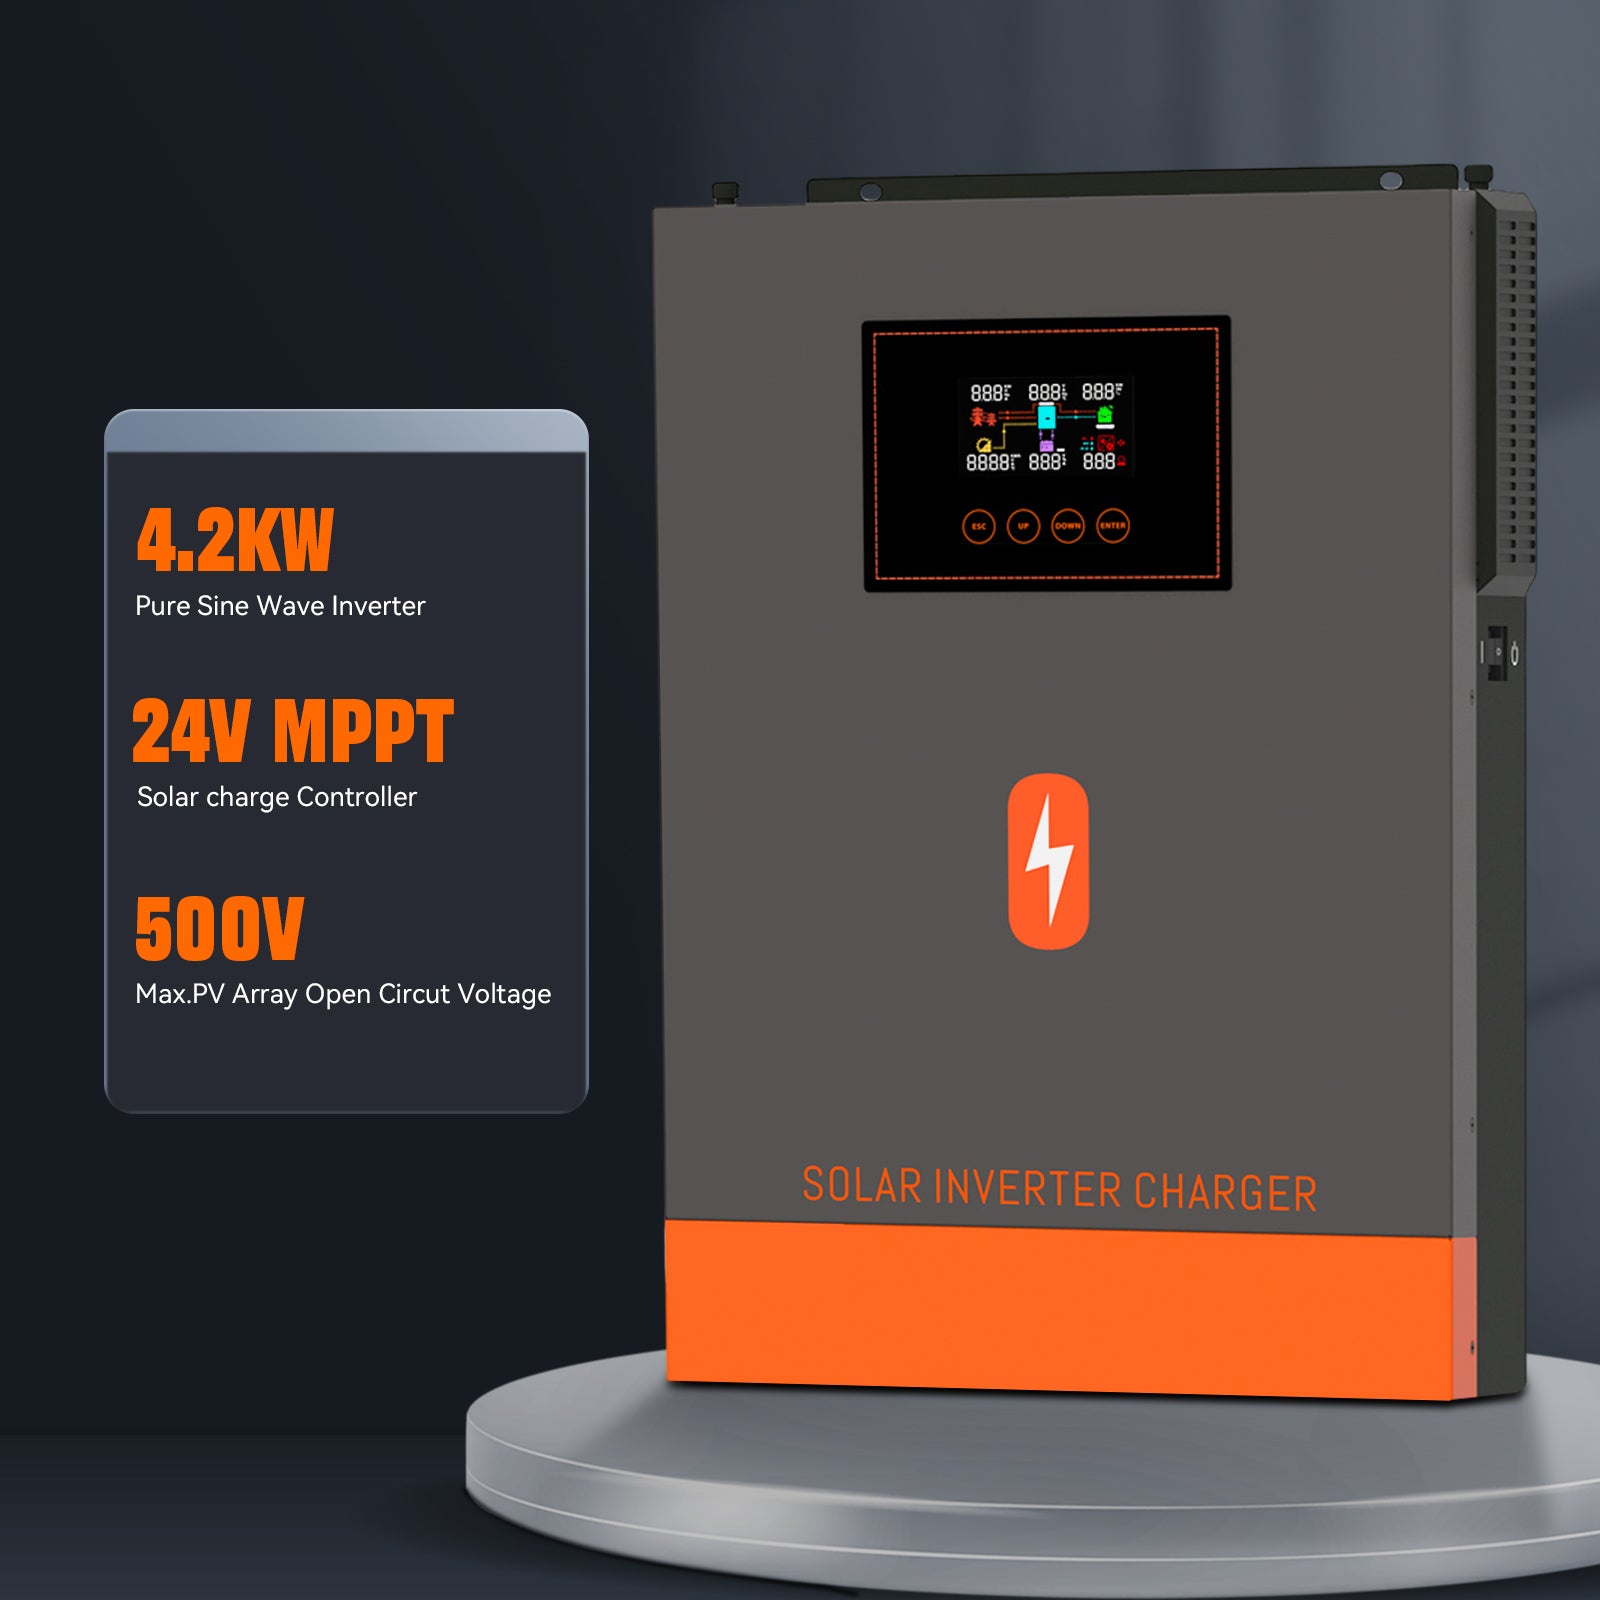 4.2kw pure sine wave inverter with mppt solar charge controller